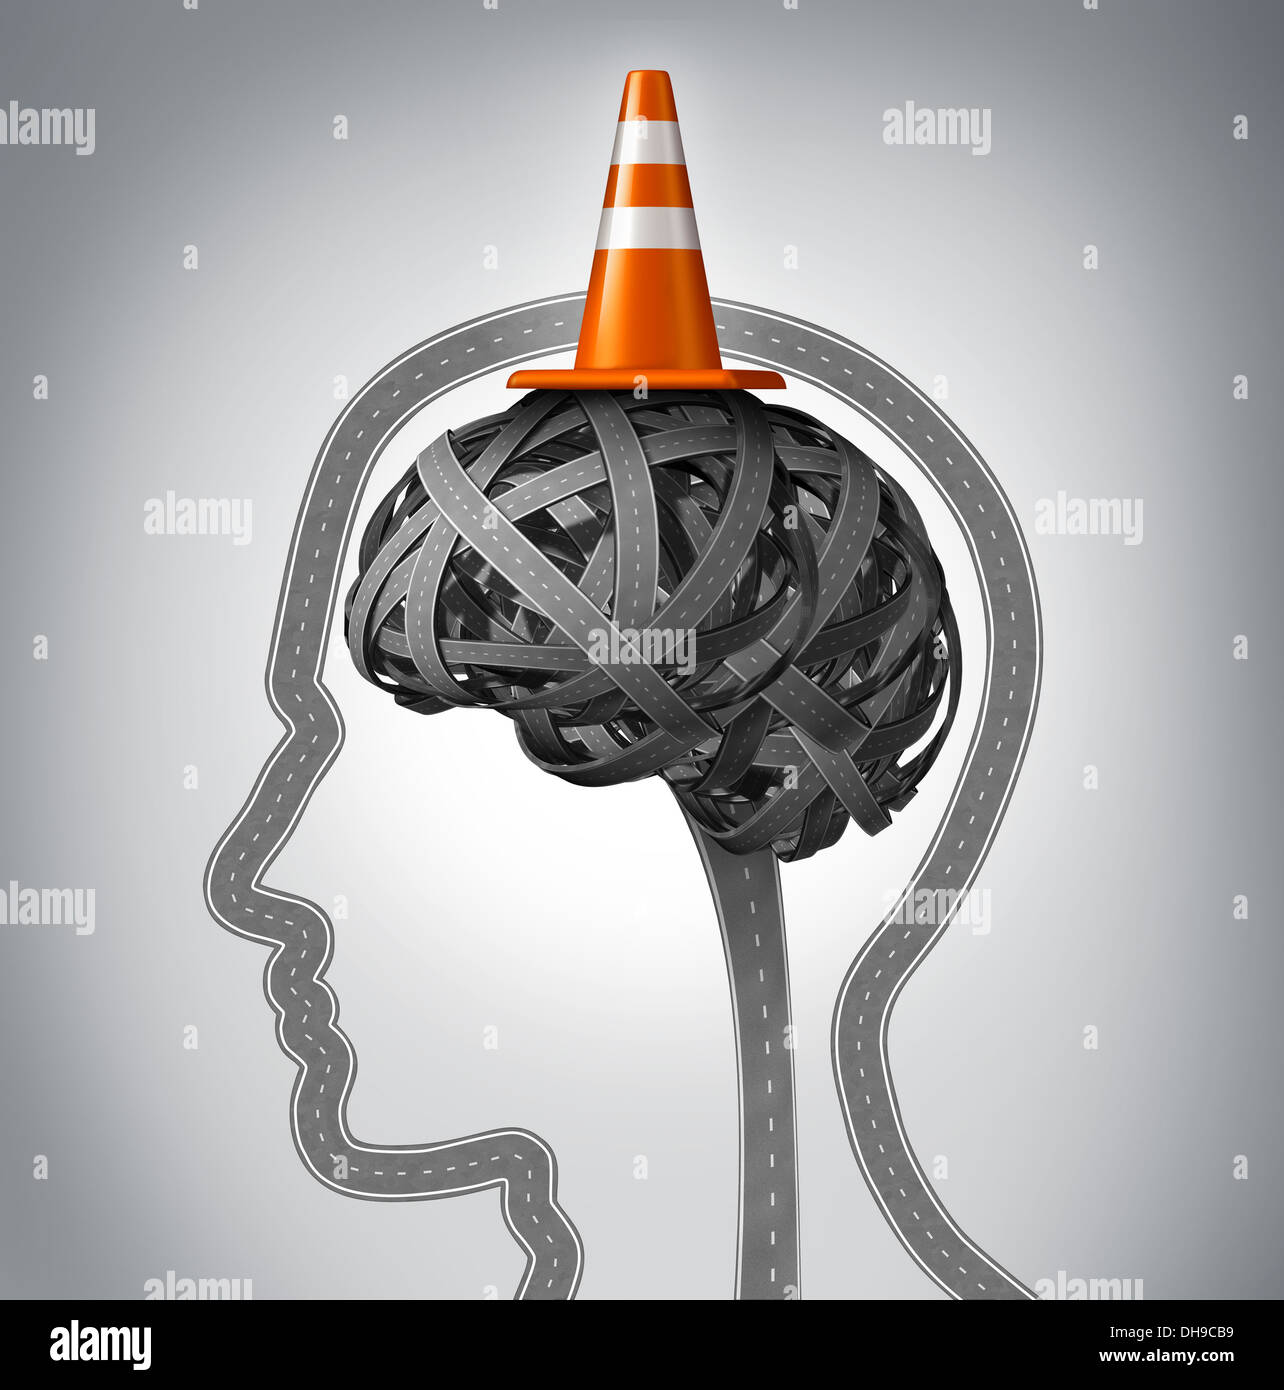 Human brain repair as neurology therapy and memory damage medical concept with an orange traffic cone as a safety hat metaphor on a group of tangled roads in the shape of a human head. Stock Photo